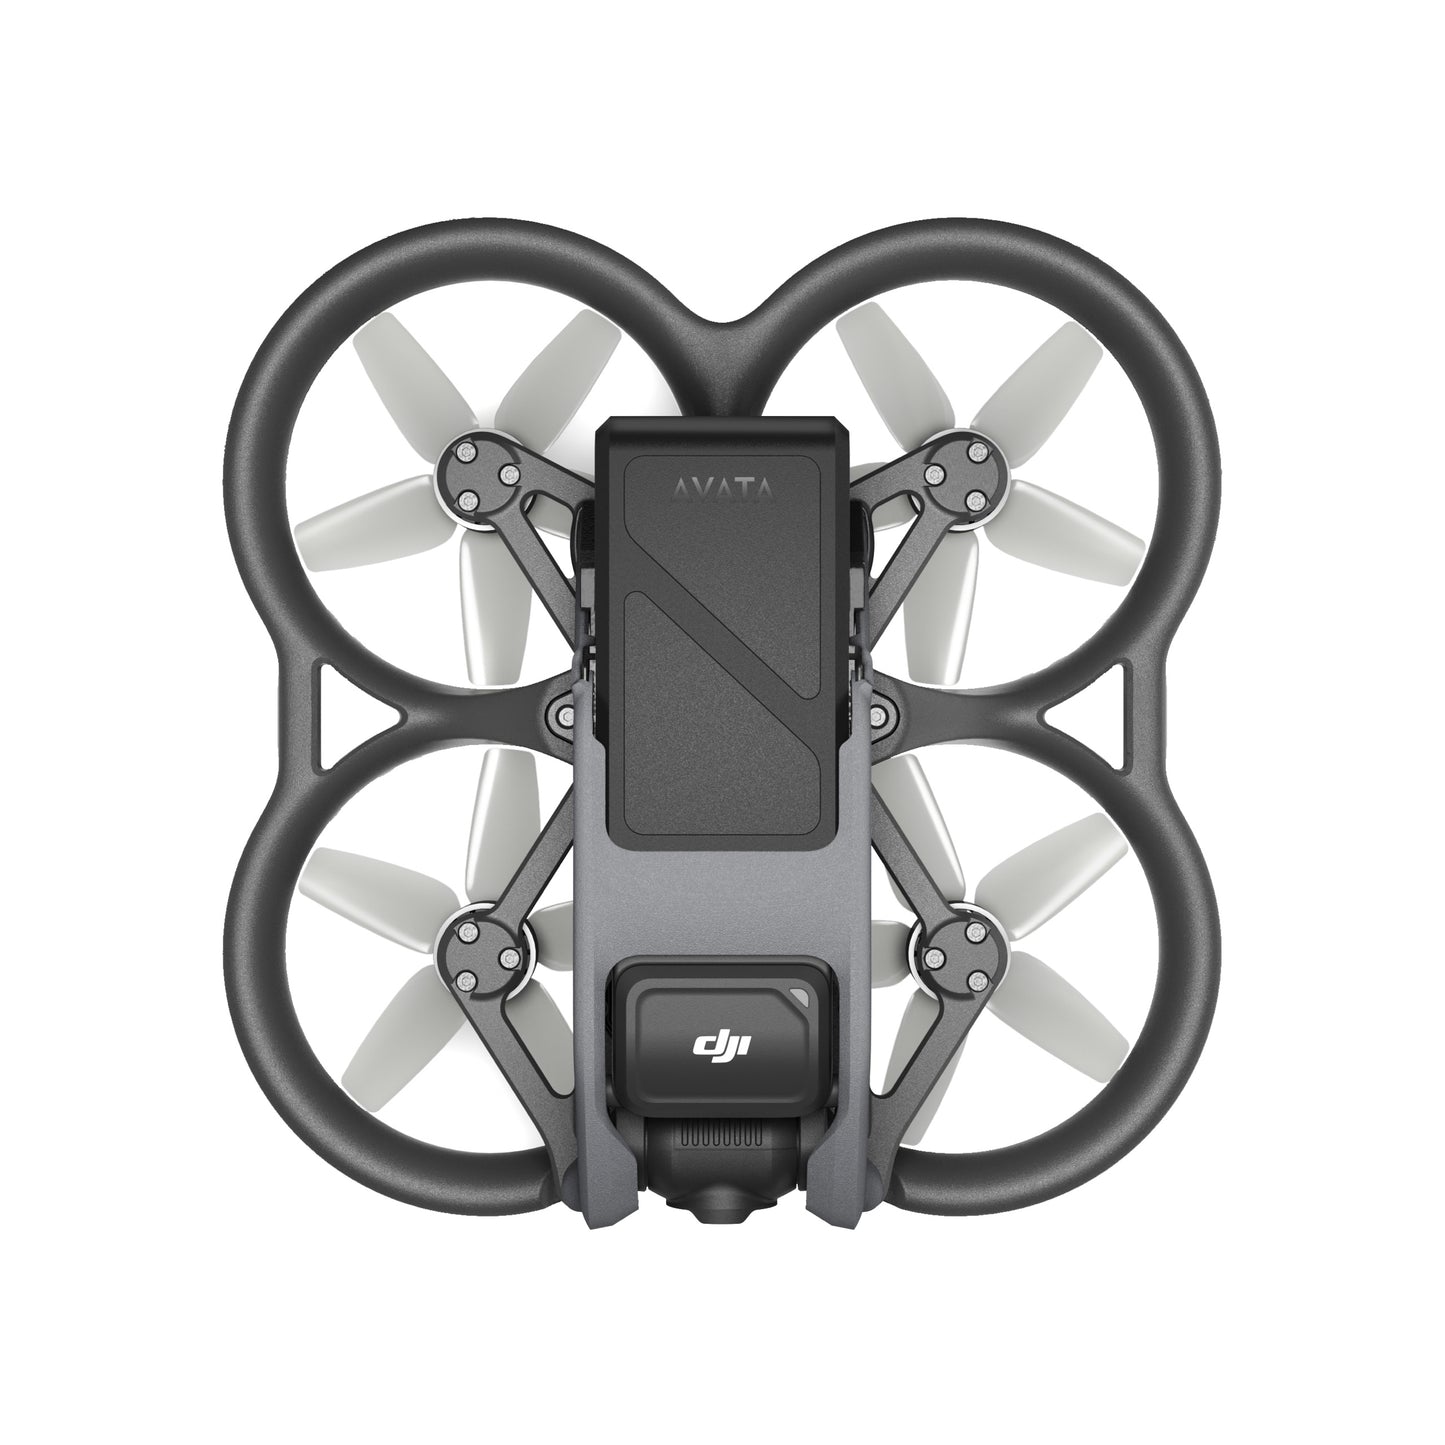 DJI Avata PRO VIEW / FLY SMART / EXPLORER Combo 4K UHD 60fps Agile Immersive Drone with 18 Minutes Flight Time, HorizonSteady, Obstacle Sensors and RTH Feature